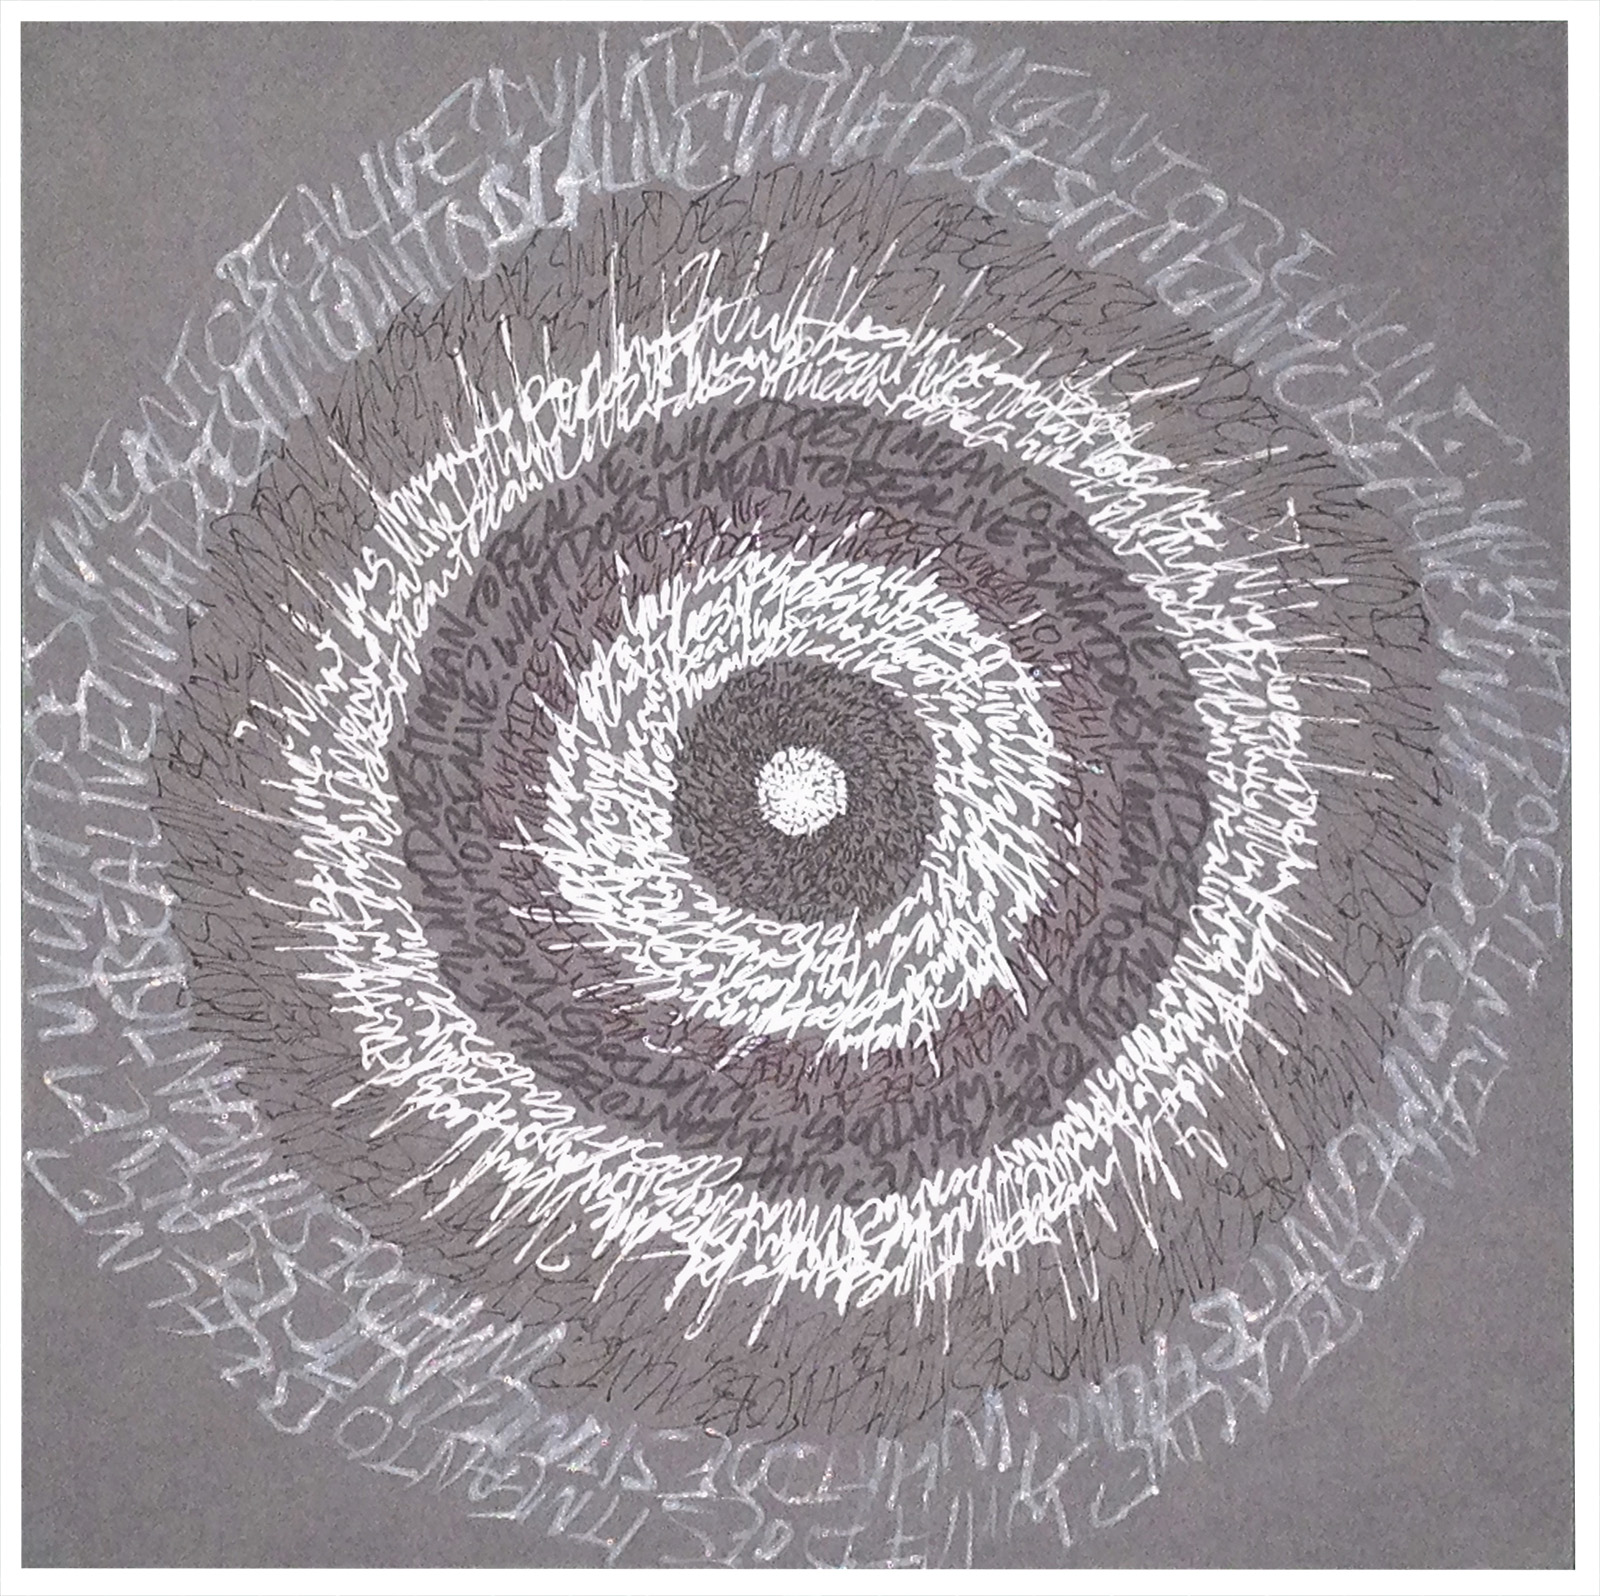 "Energy Spiral—What Does It Mean To Be Alive?", 2014, pen & marker on paper, 10 in. x 10 in.